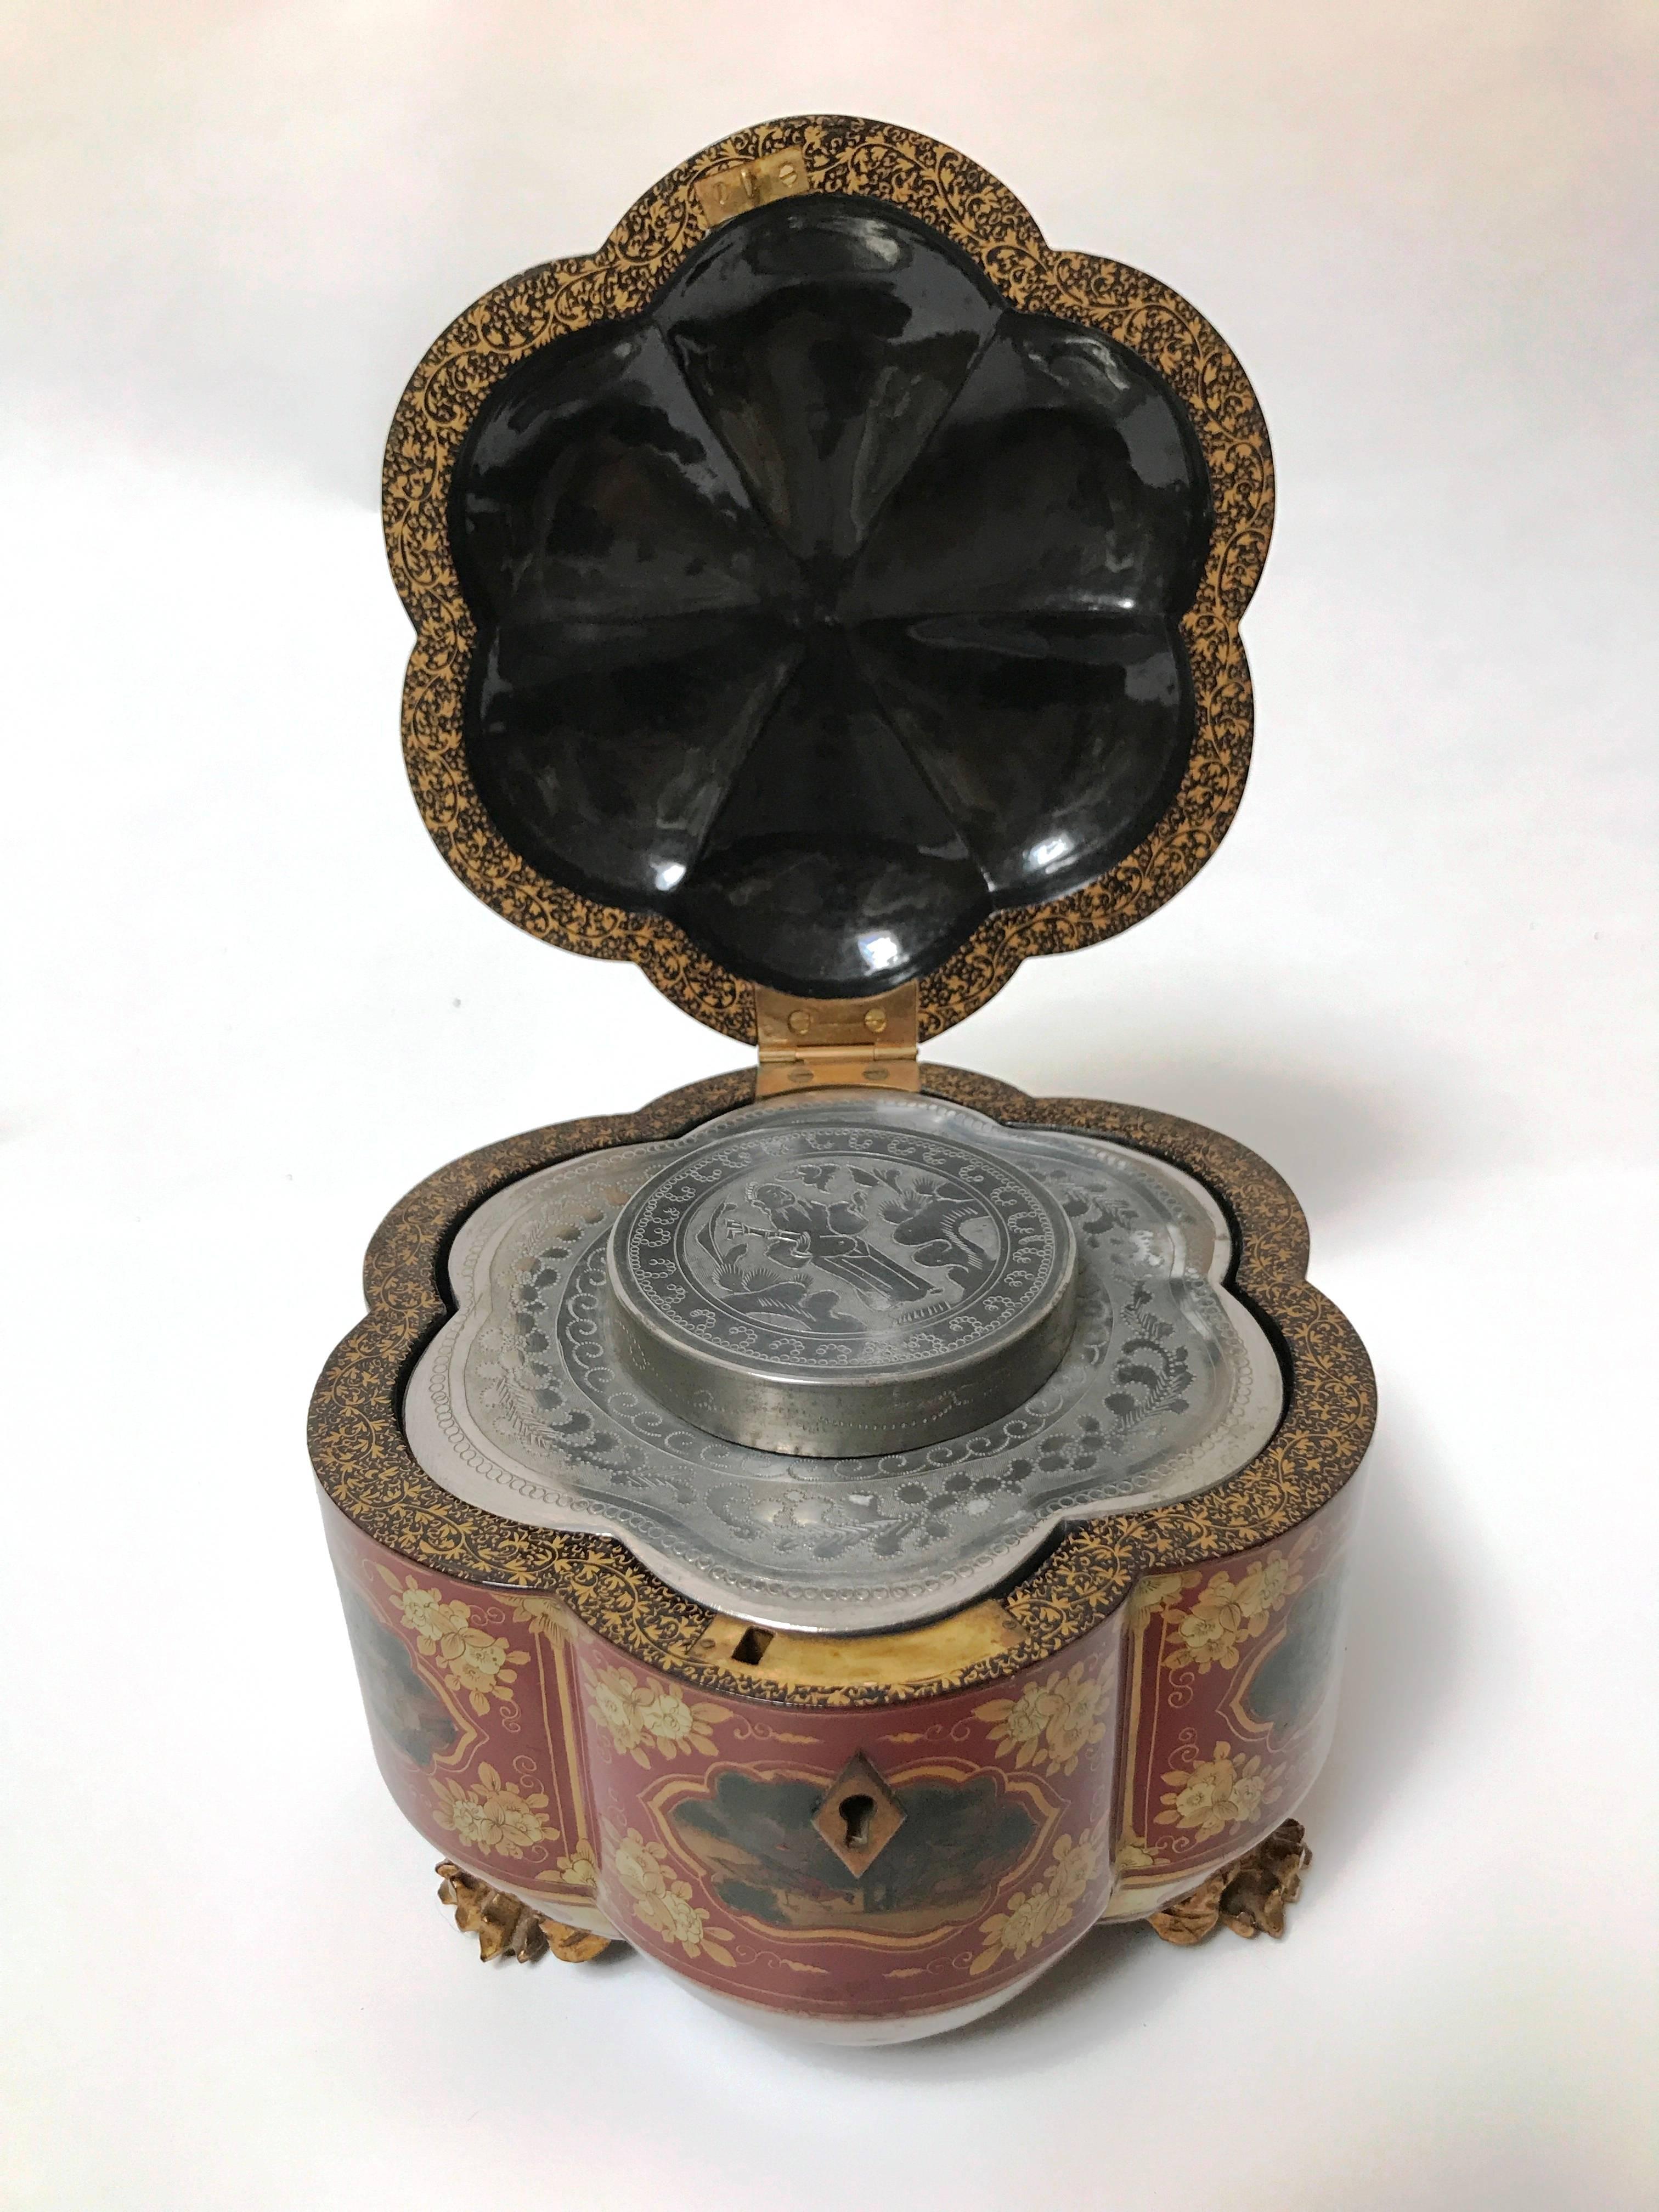 Lovely and rare red melon form Chinese export tea caddy, circa 1830, with original melon fitted liner, feet and stem finial

A perfect example of export lacquer.